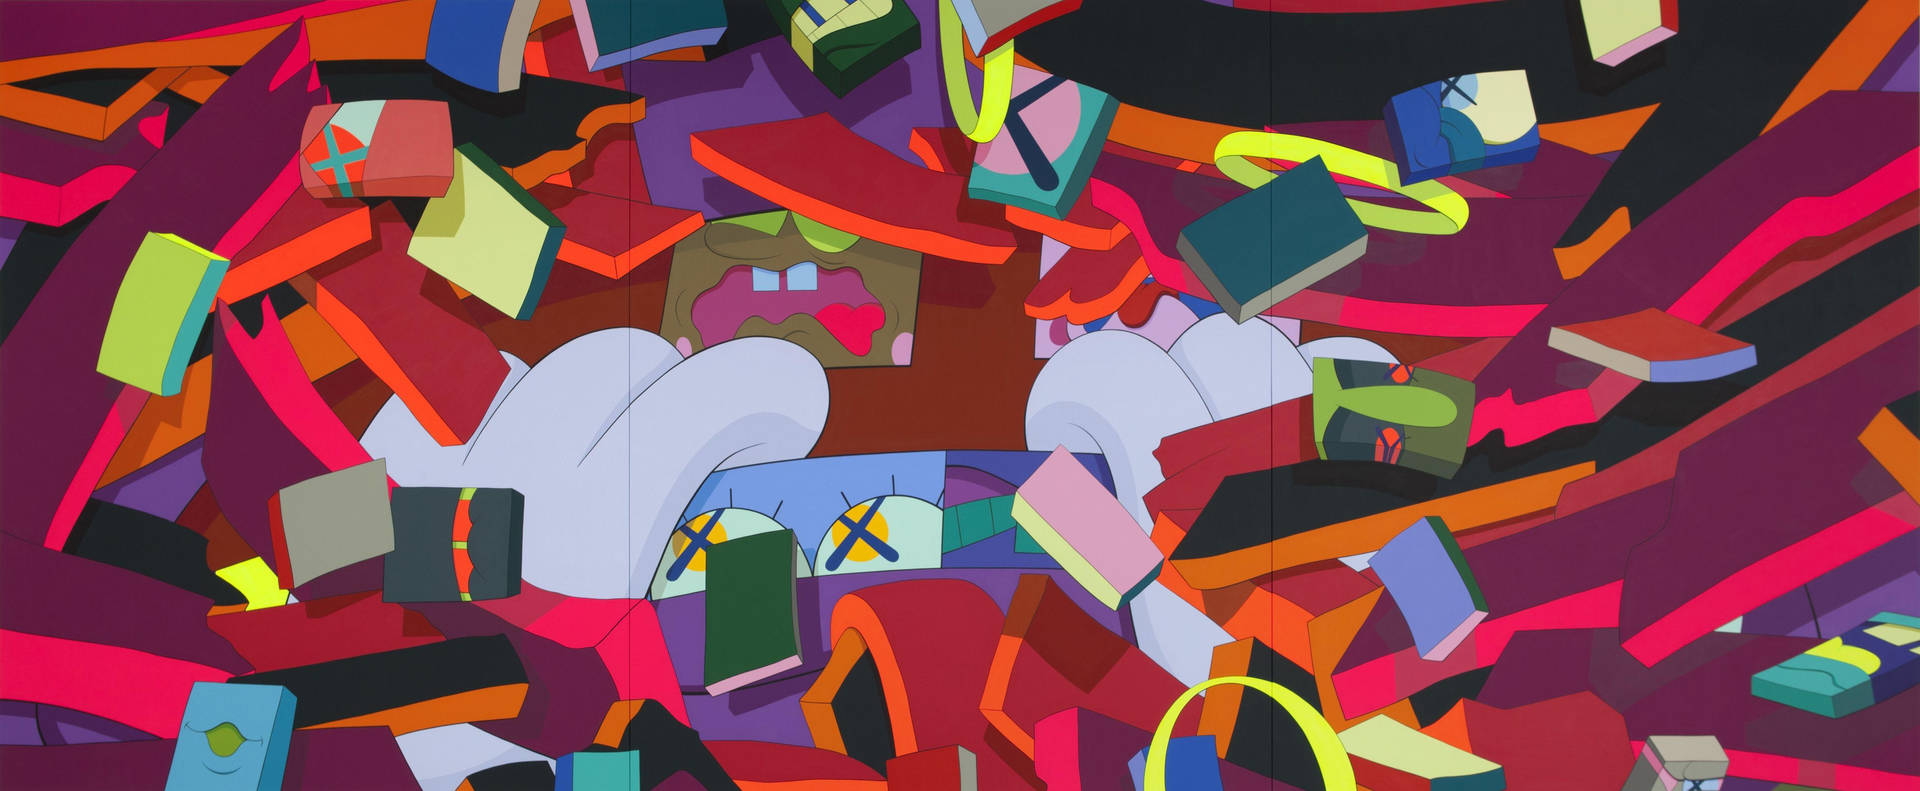 5052X2082 Kaws Wallpaper and Background